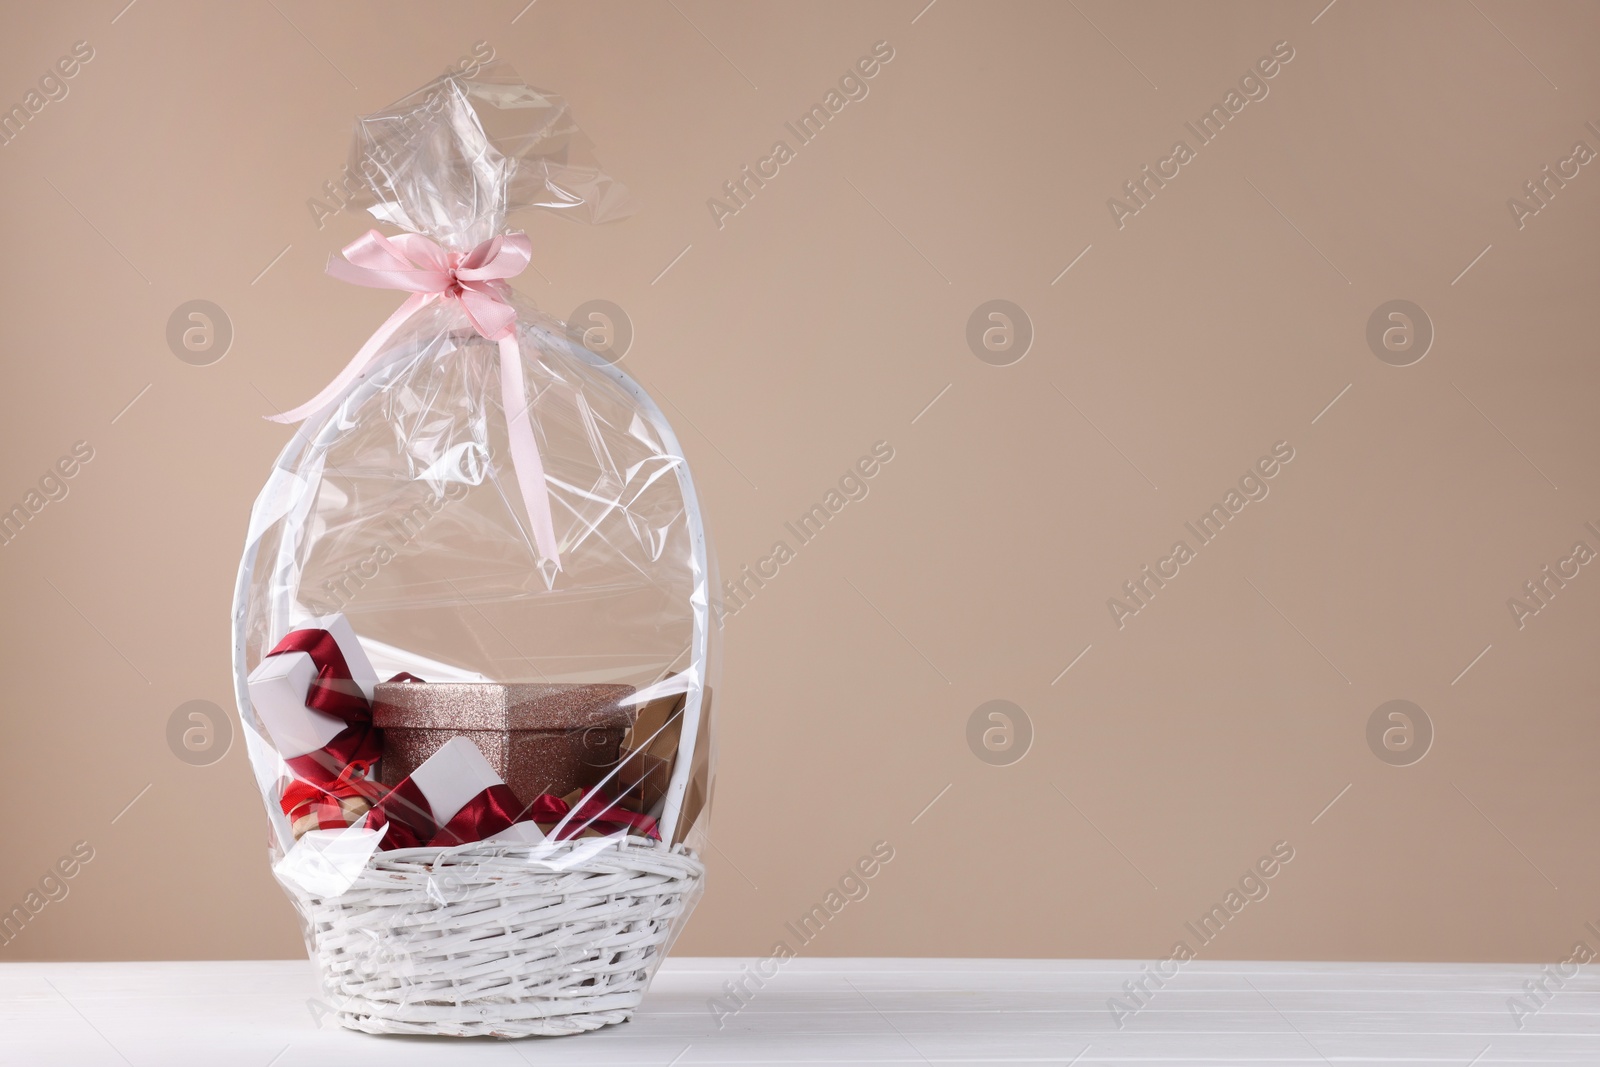 Photo of Wicker basket full of gift boxes on white table against beige background. Space for text